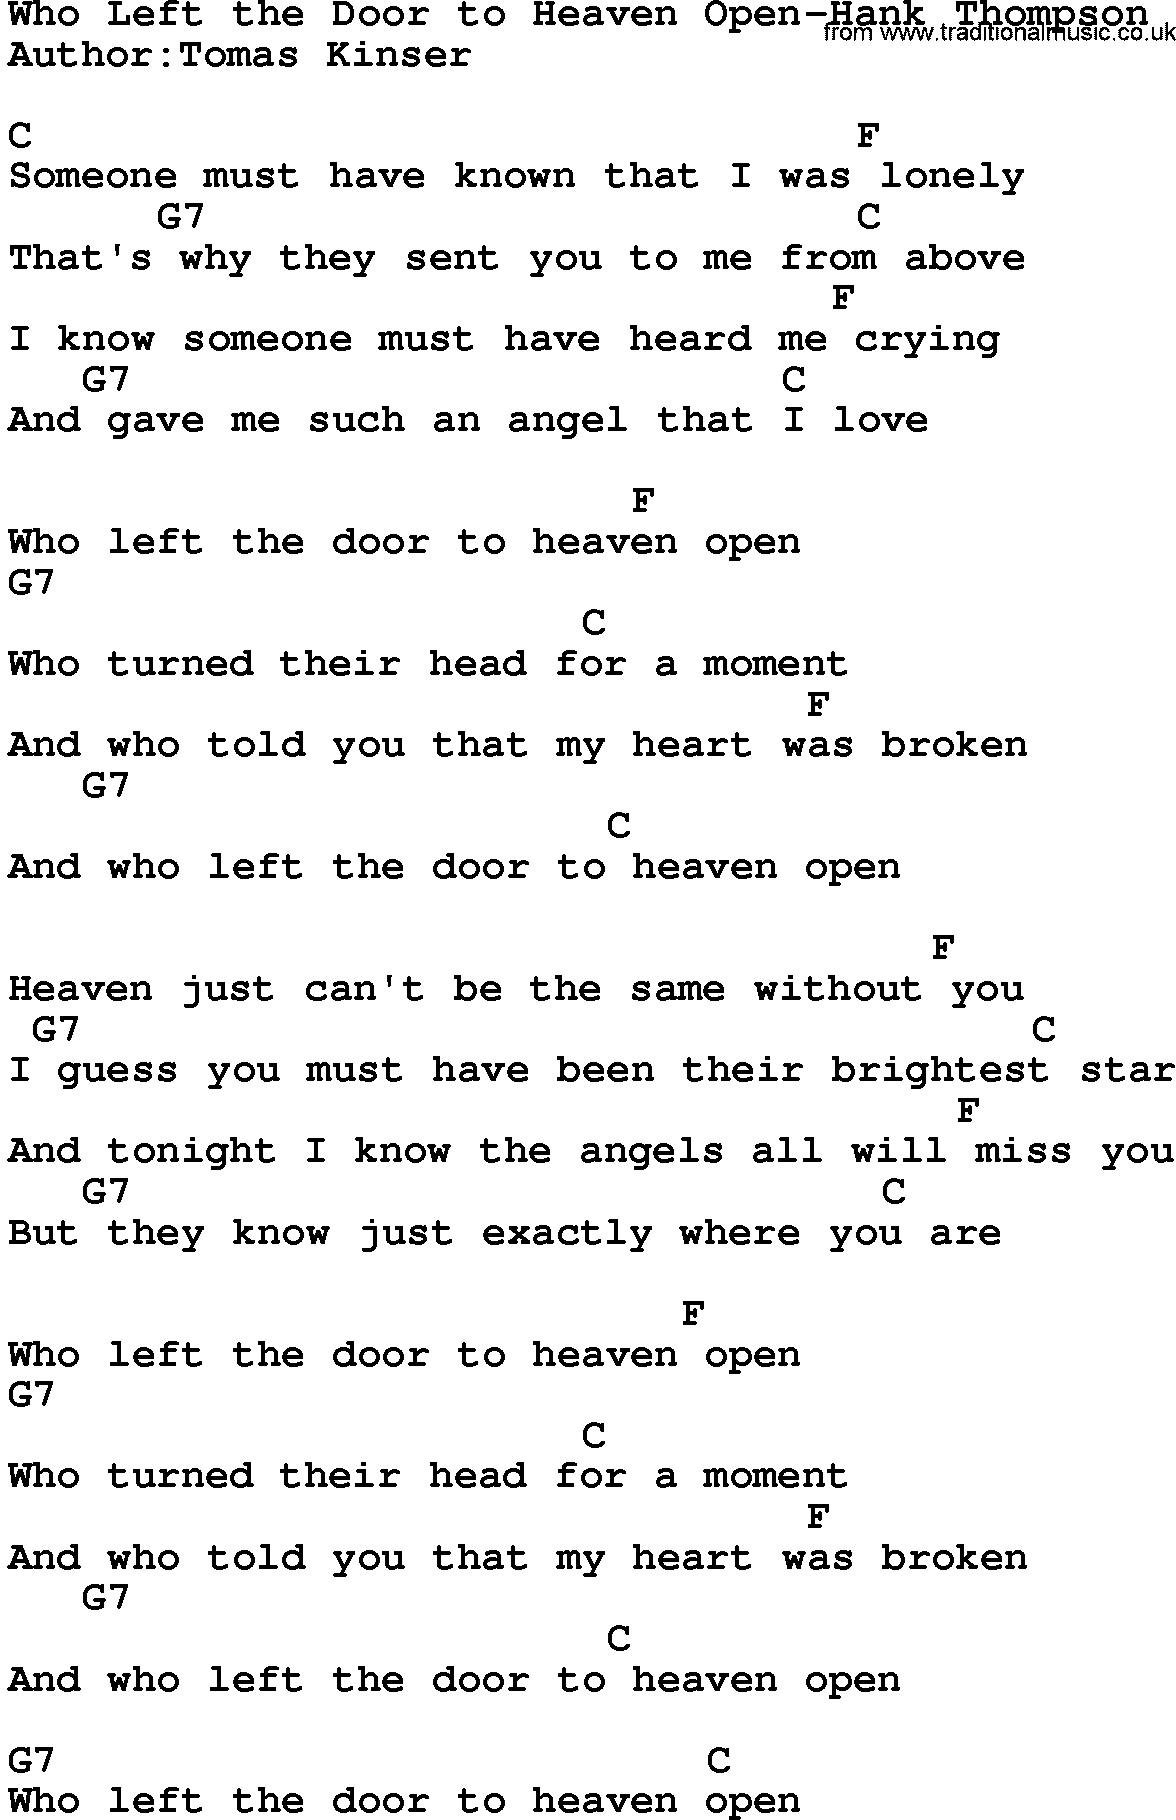 Country music song: Who Left The Door To Heaven Open-Hank Thompson lyrics and chords